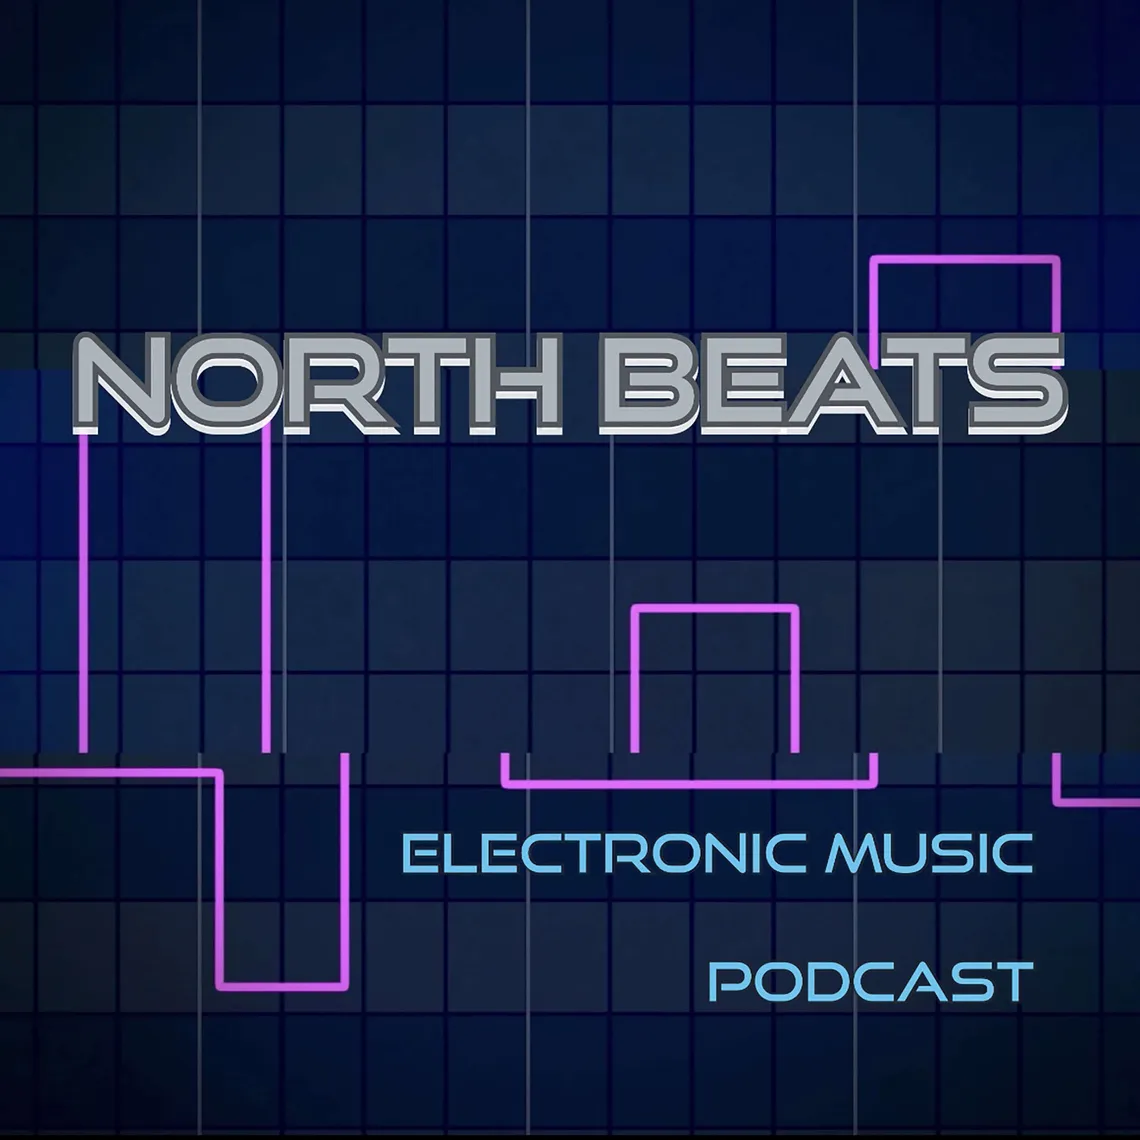 Shipwreck Detective interview on North Beats podcast